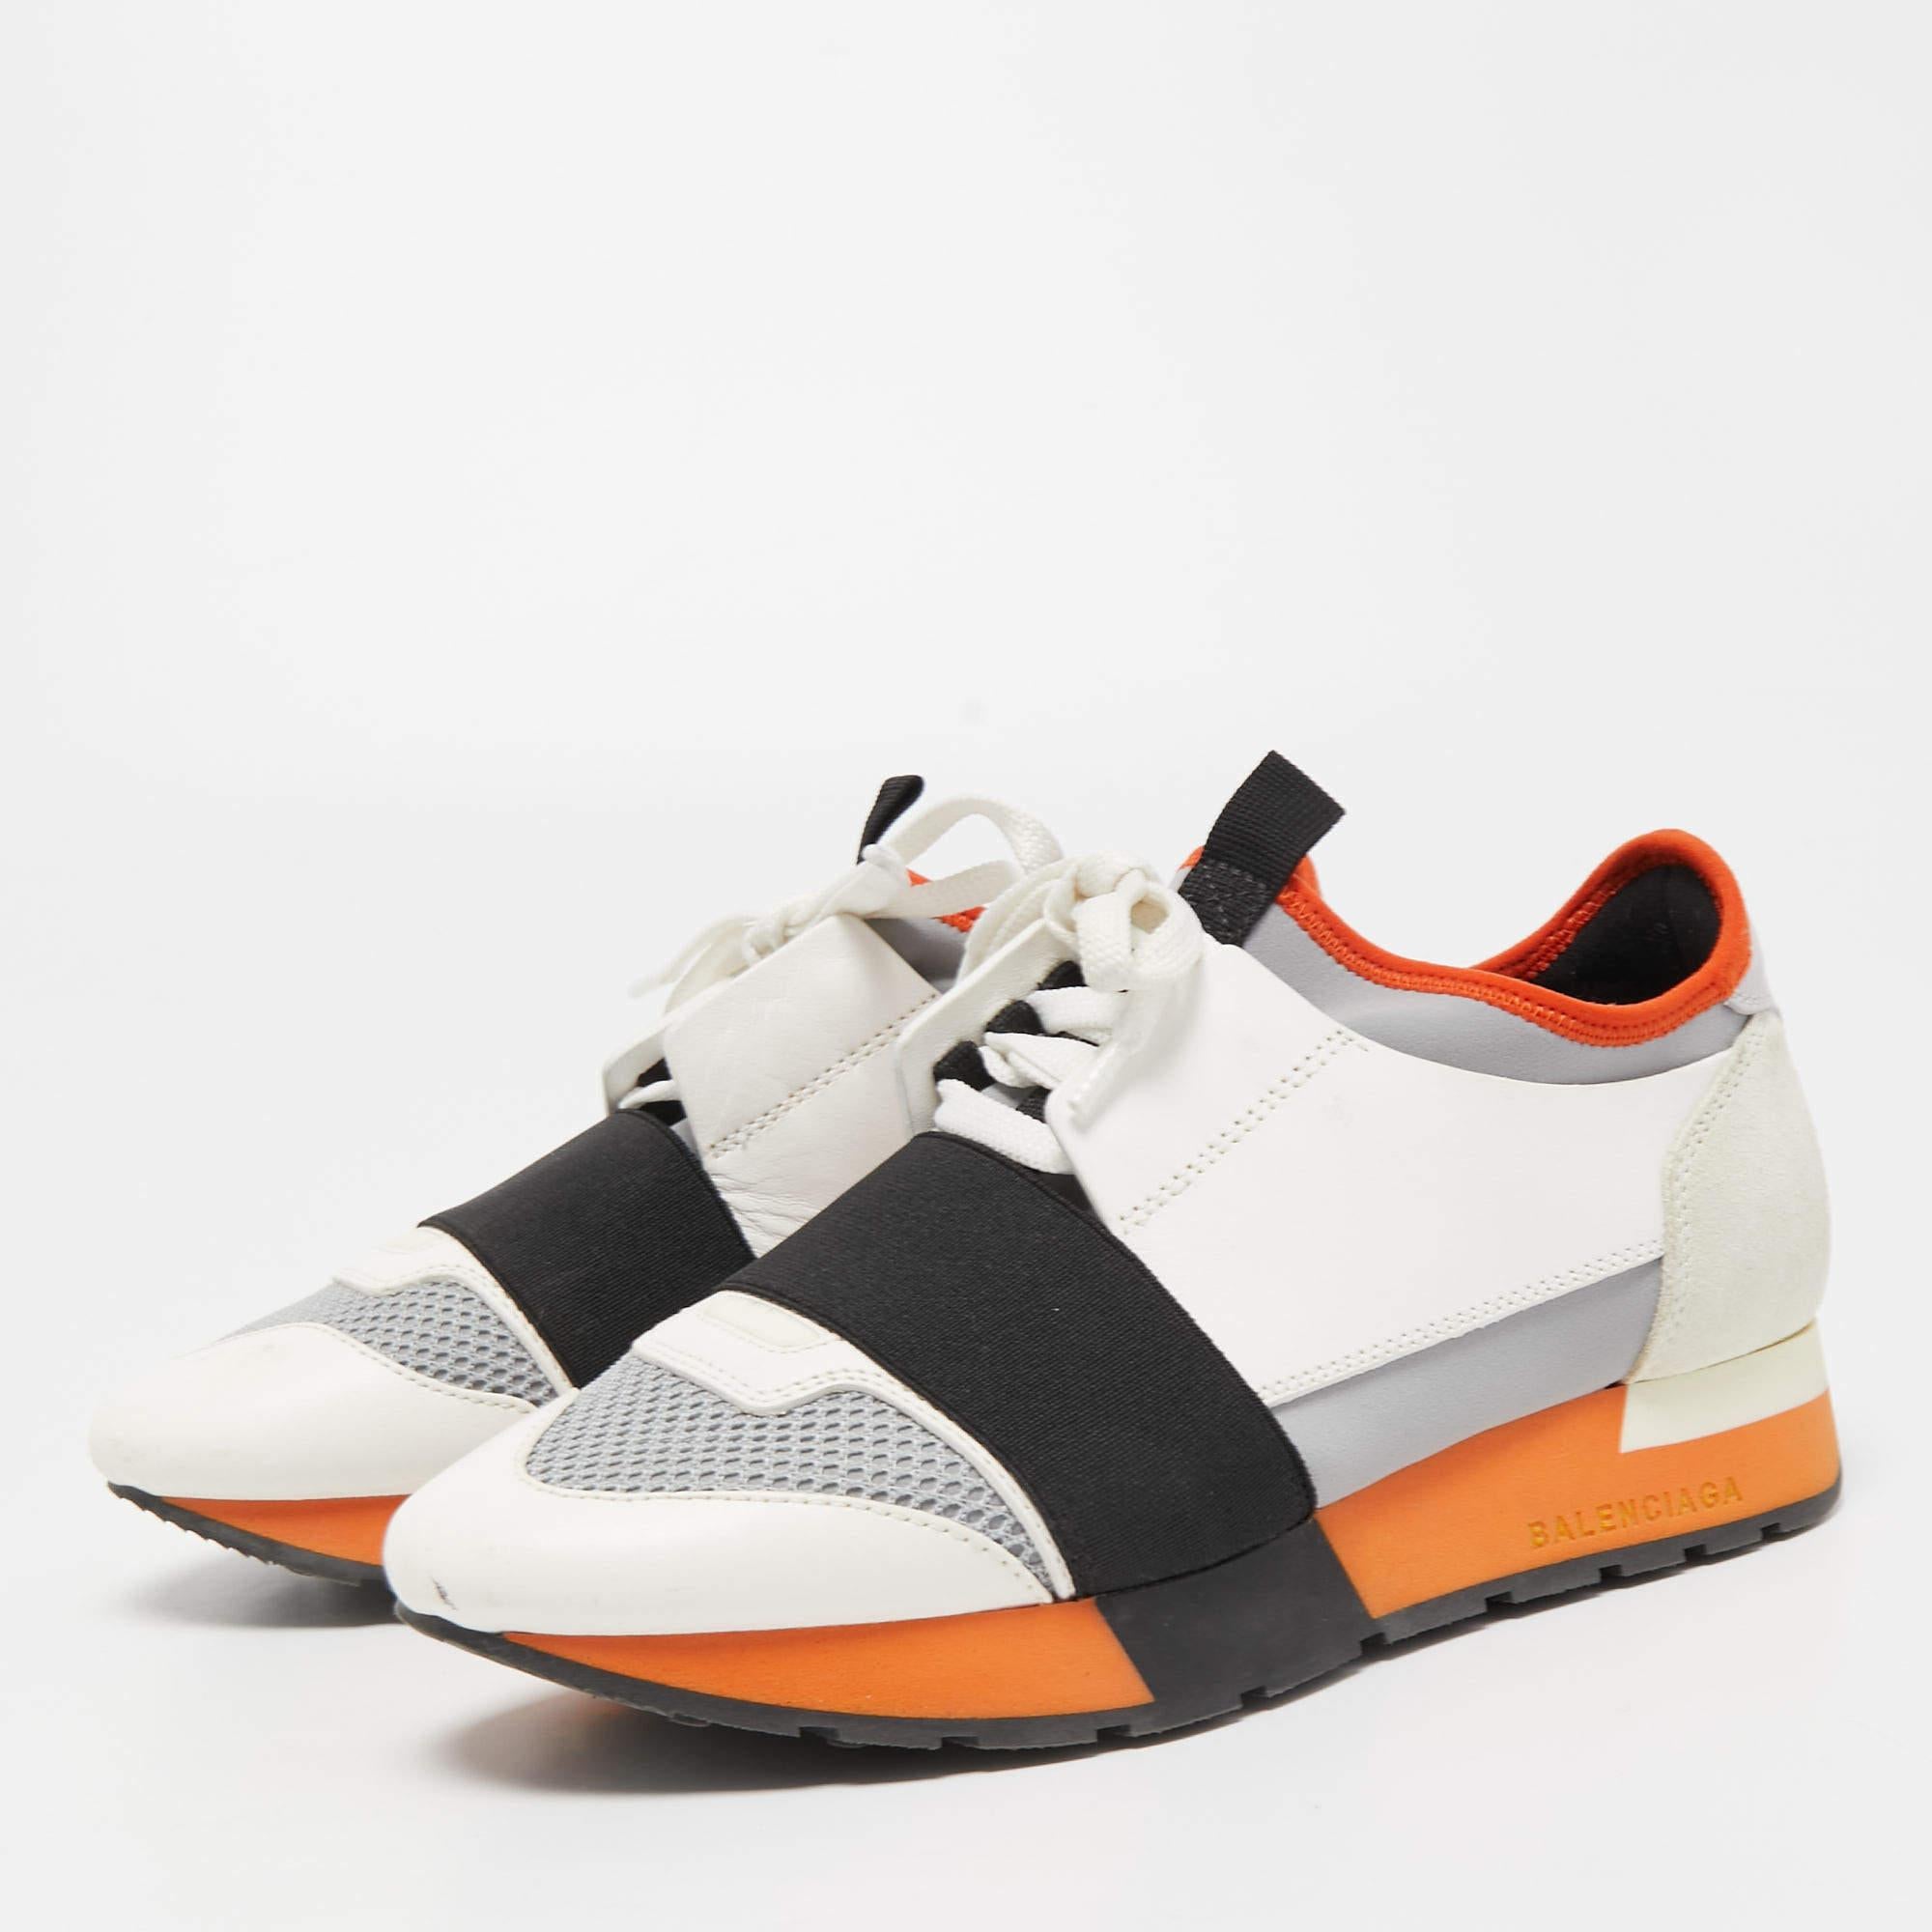 Balenciaga Tricolor Leather and Mesh Race Runner Sneakers Size 36 For Sale 2